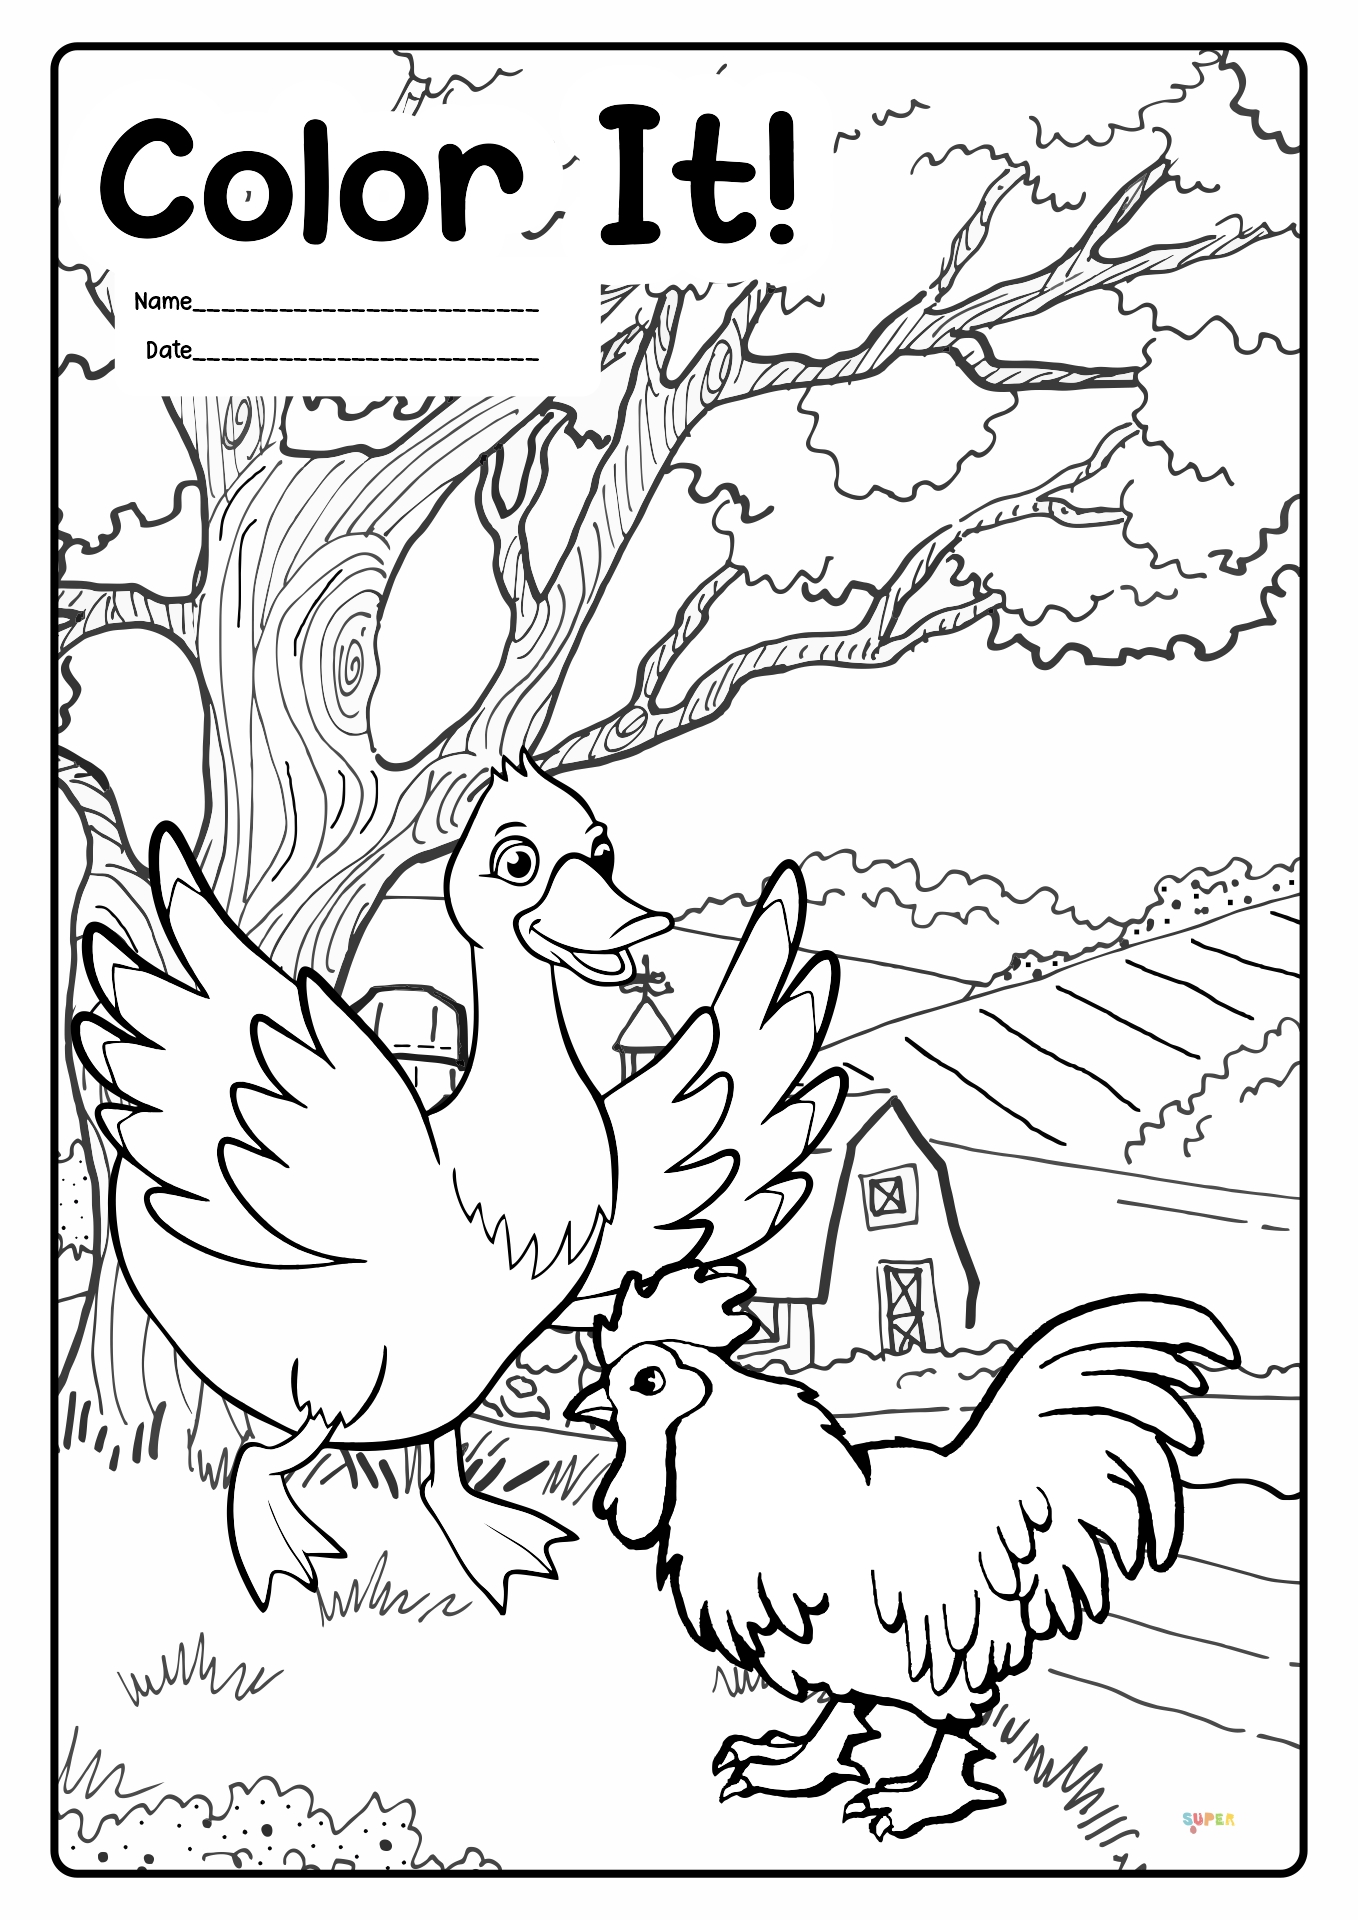 Free Printable Coloring Pages Image